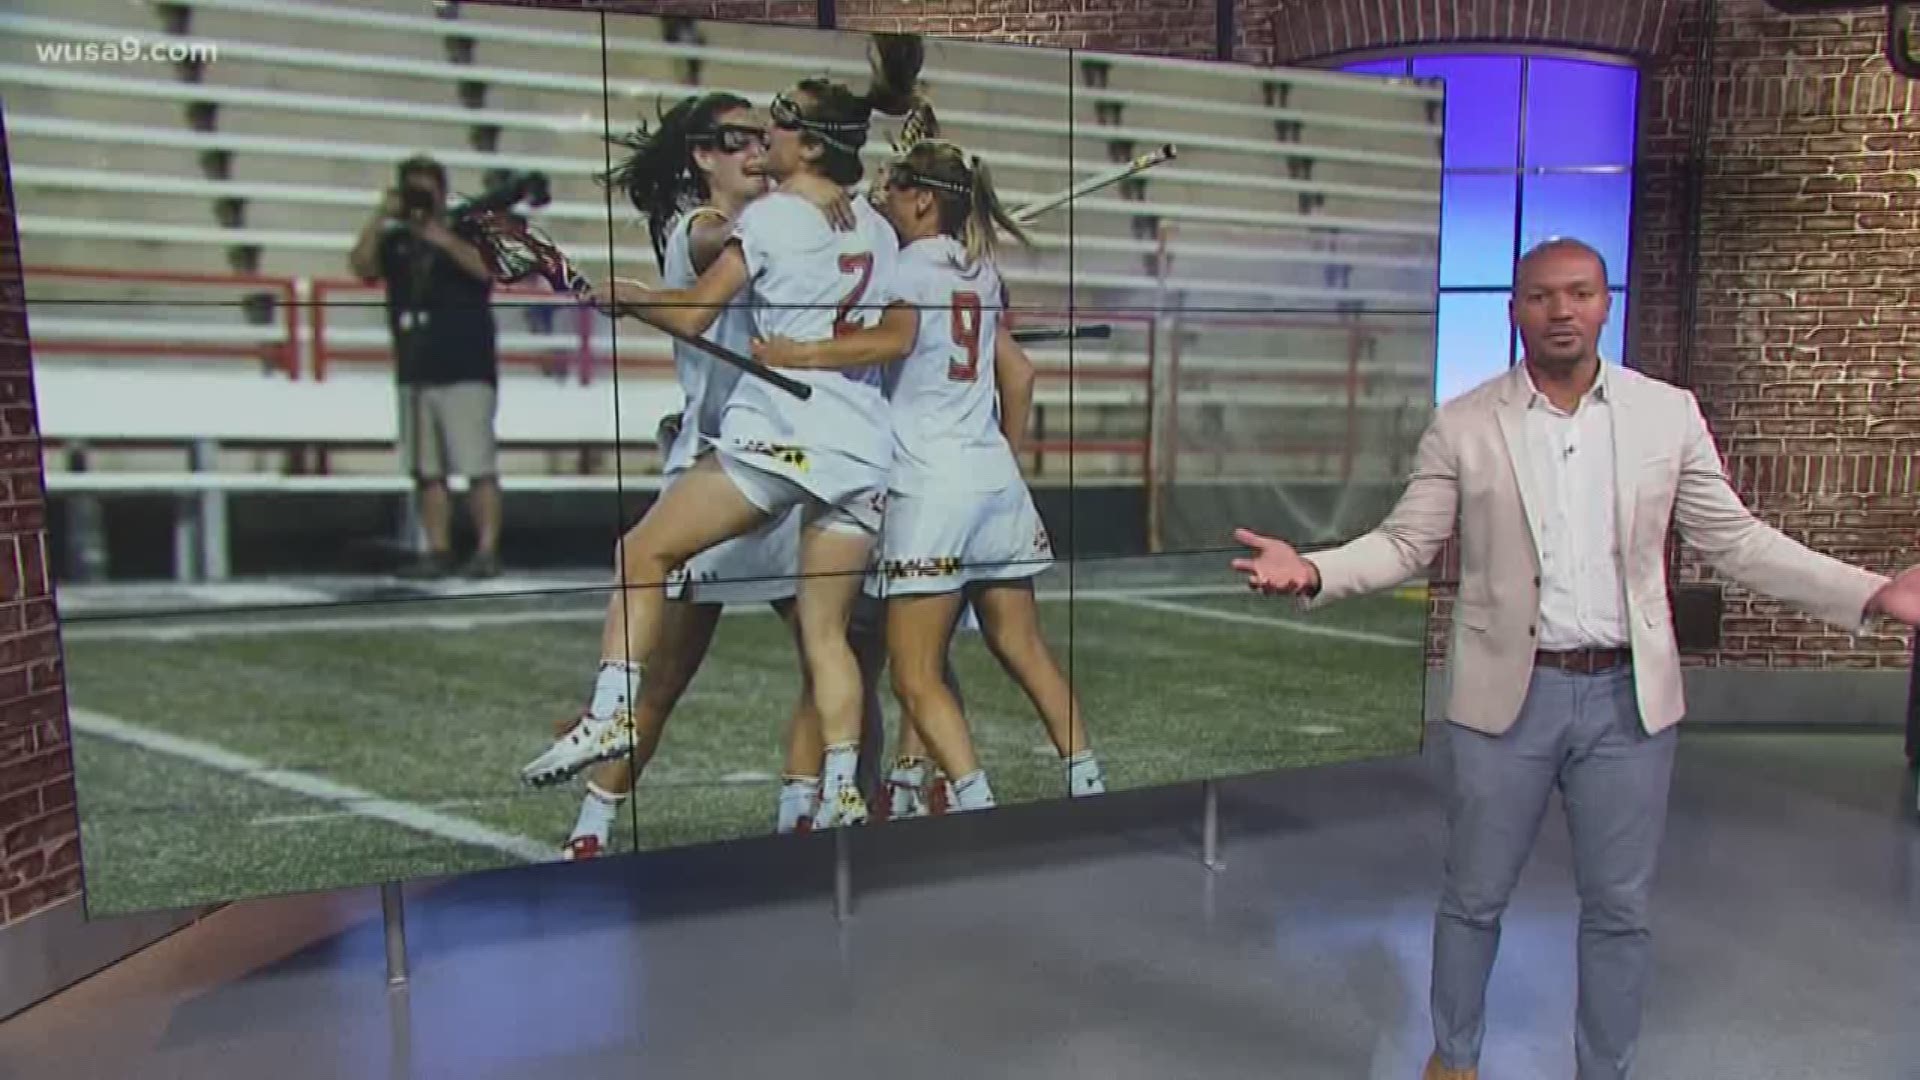 The Maryland women's lacrosse team is headed to its 11th straight final four